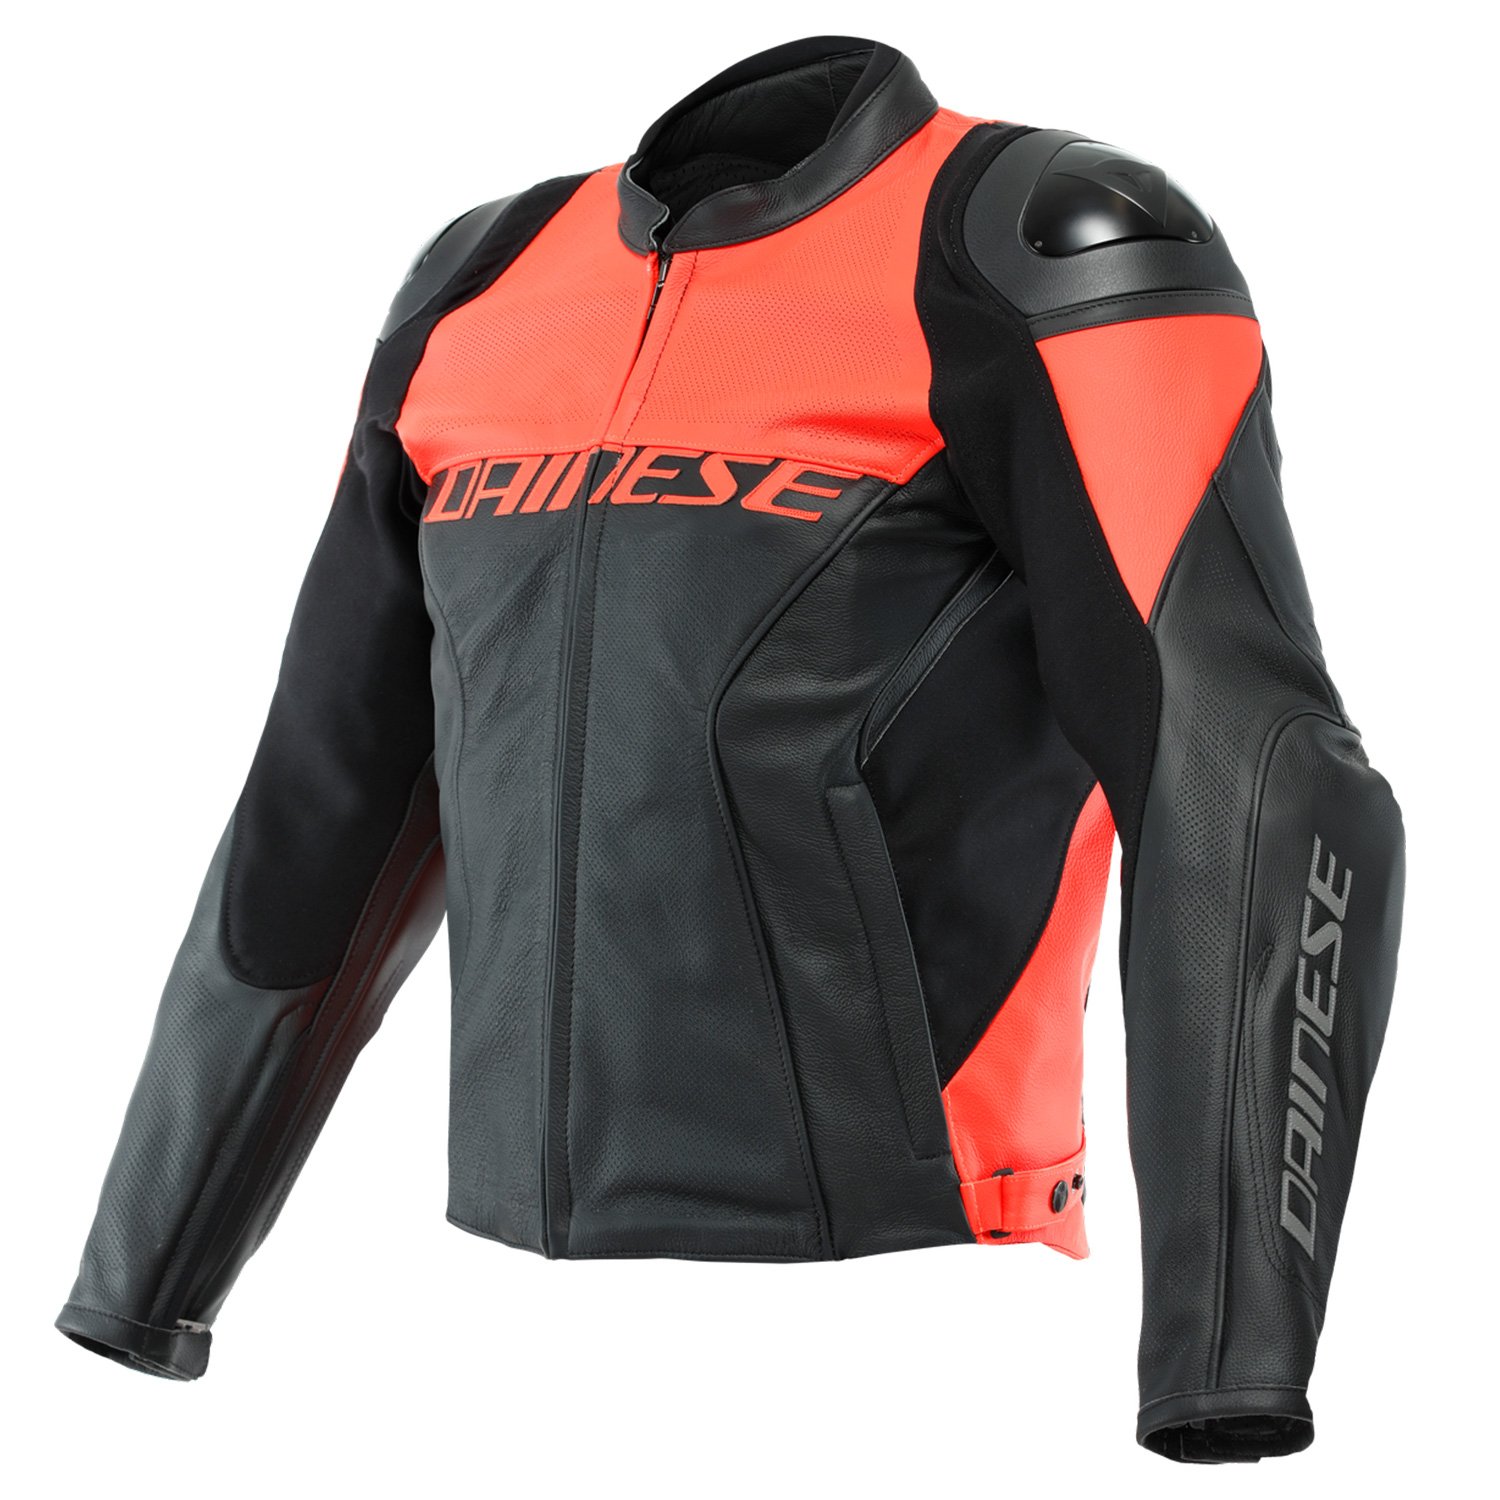 Image of Dainese Racing 4 Perforated Leather Jacket Black Fluo Red Size 56 ID 8051019302960